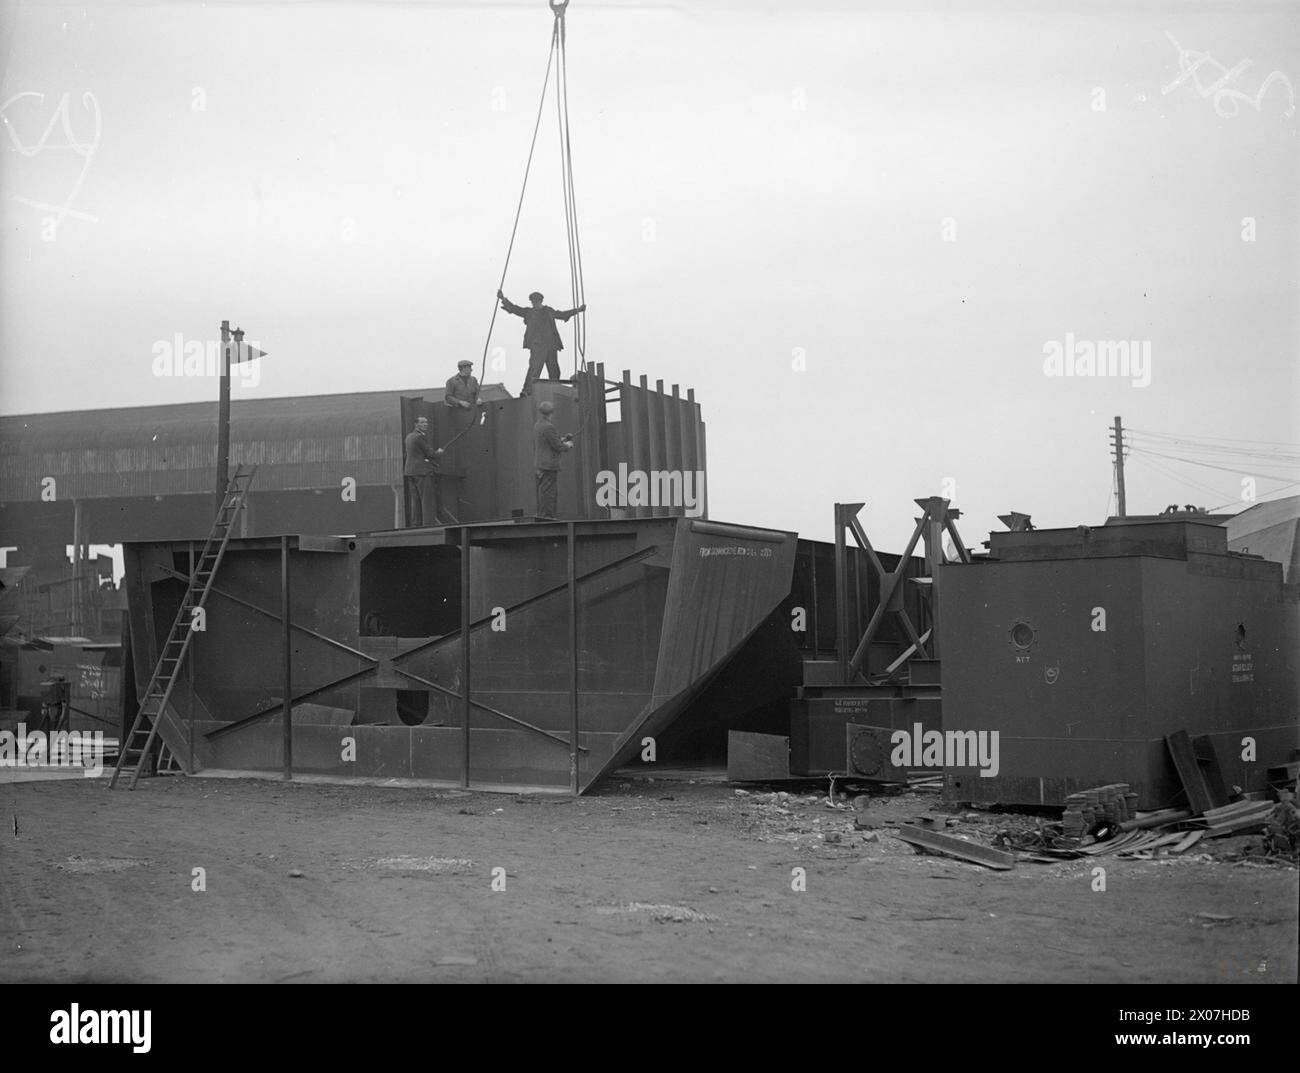 MEN AND WOMEN WHO BUILD BRITAIN'S FABRICATED SHIPS. APRIL 1944, THE BRITISH SHIPYARDS OF HENRY SCARR LTD, HESSLE NEAR HULL. - Men lifting off the crew's quarters from a pile of parts among which are a stern section and the engine room casing  Henry Scarr Ltd Stock Photo